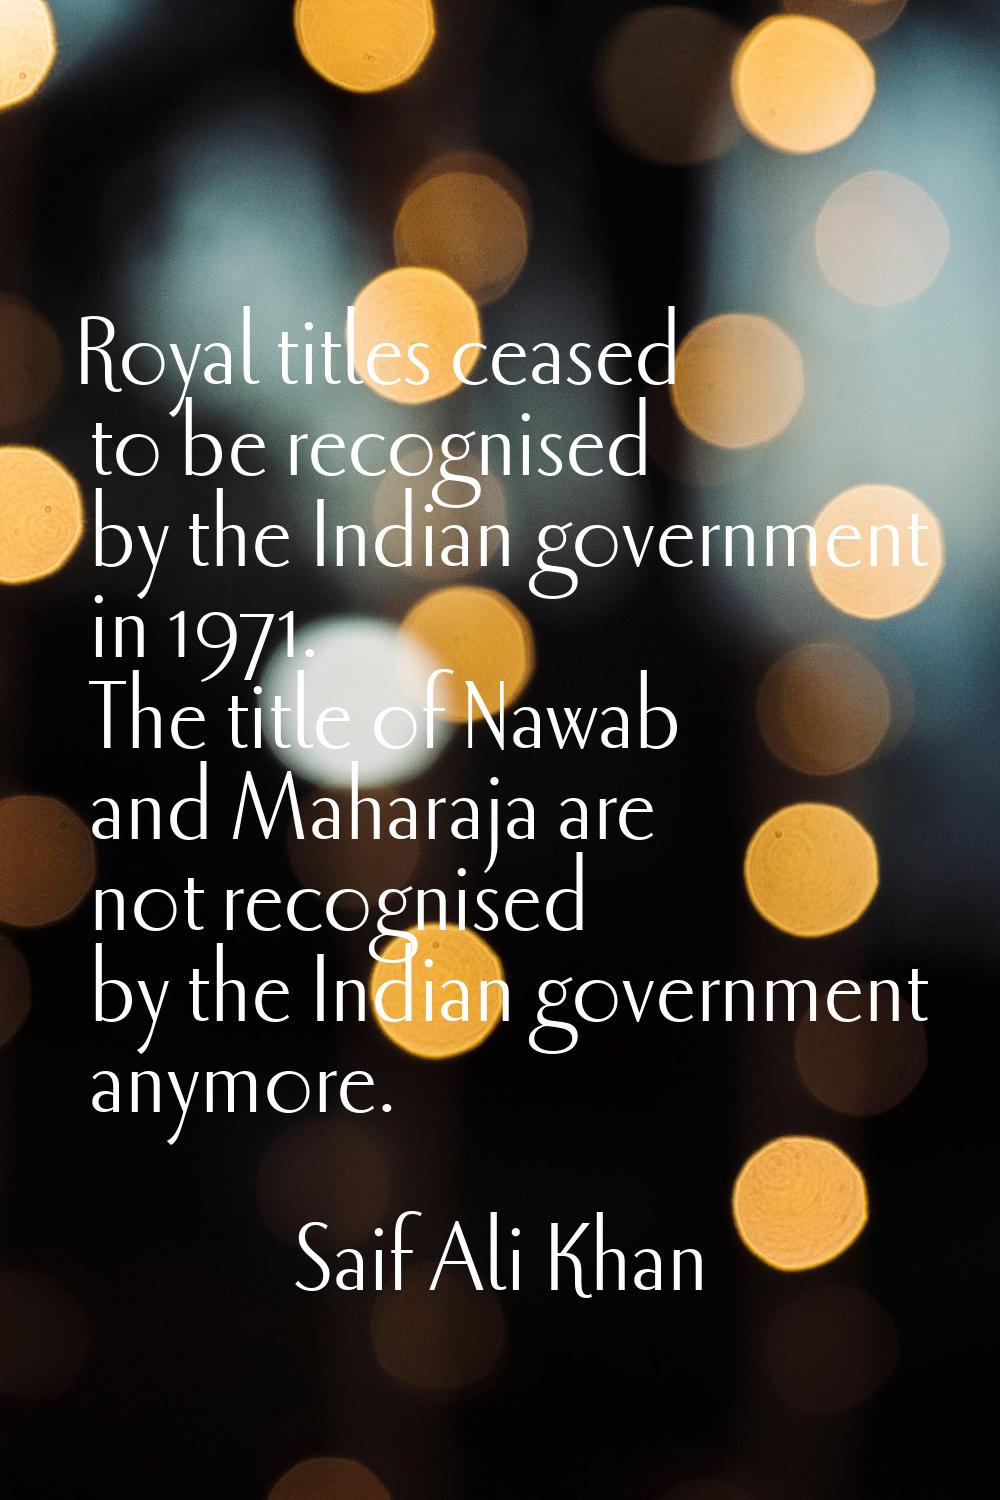 Royal titles ceased to be recognised by the Indian government in 1971. The title of Nawab and Mahar